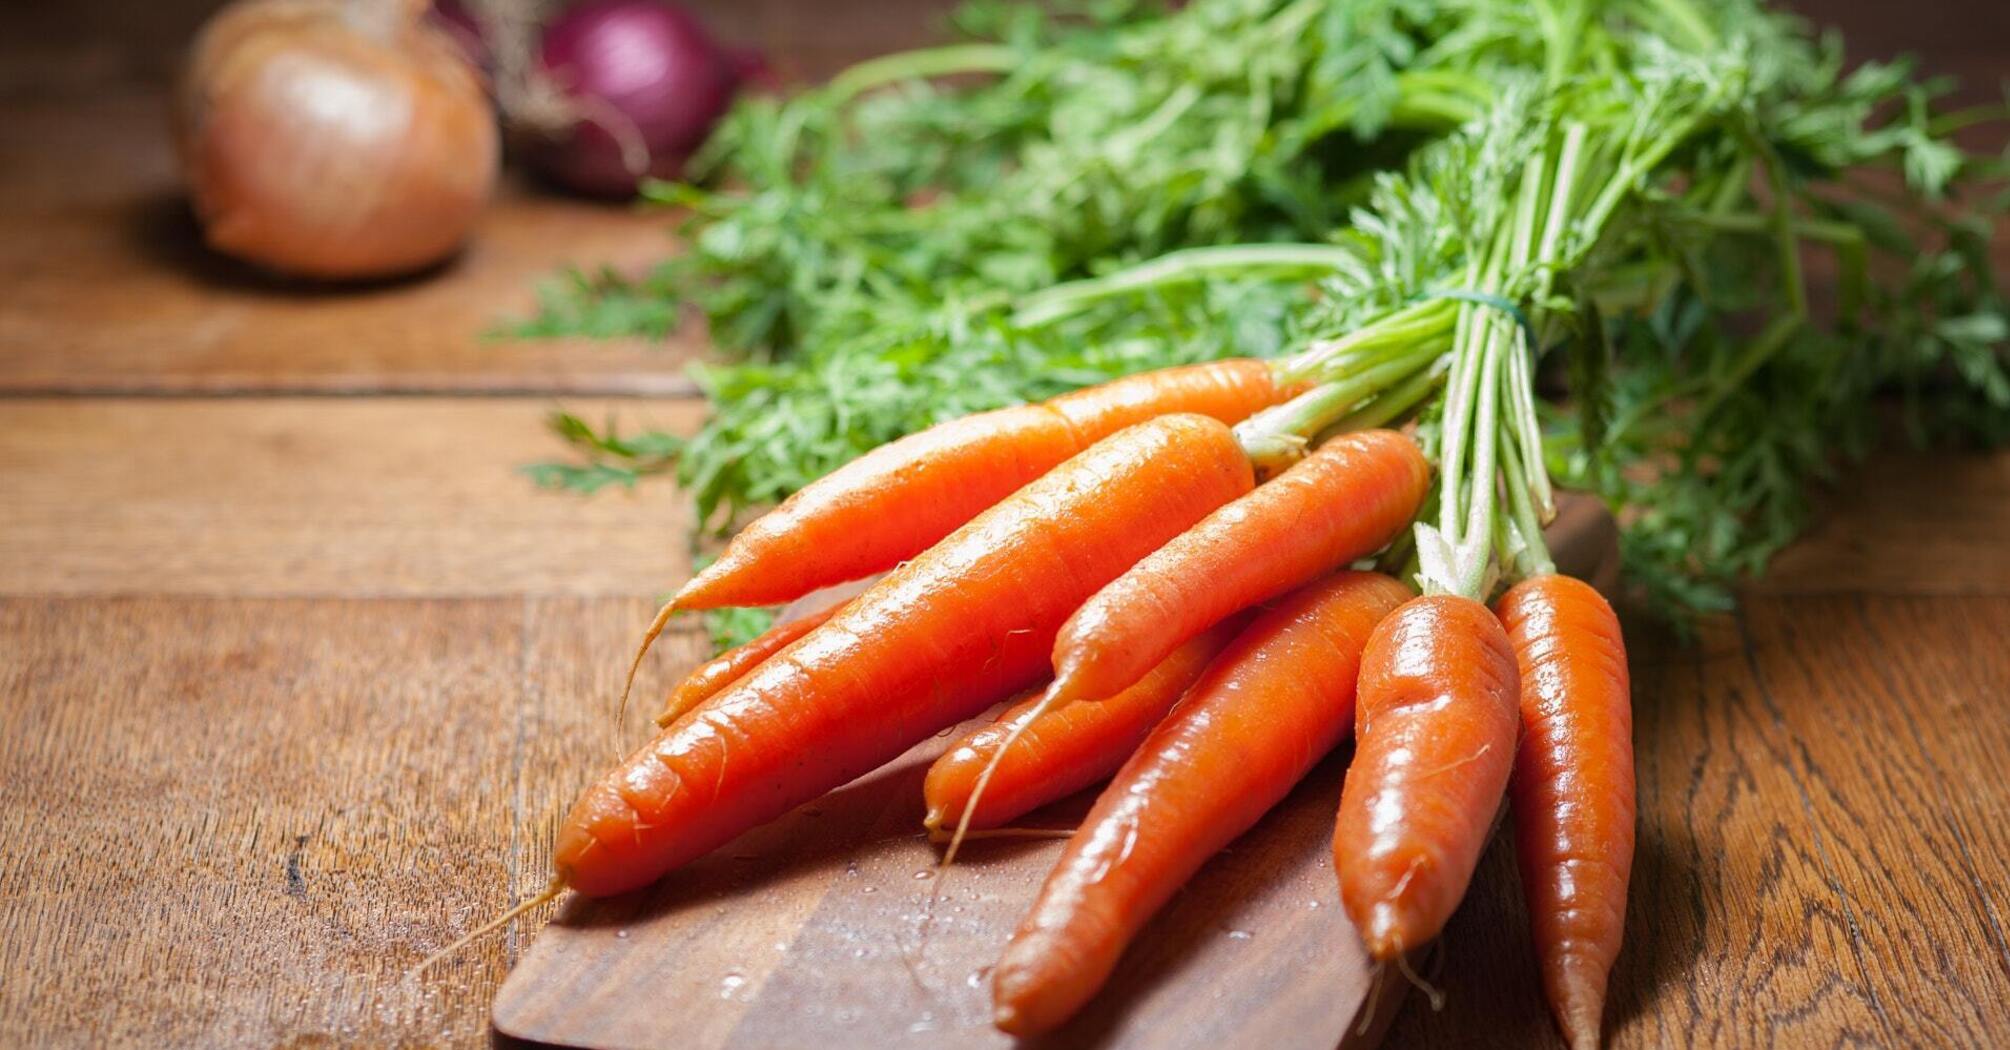 How to pickle carrots quickly and deliciously: ready in just a few hours